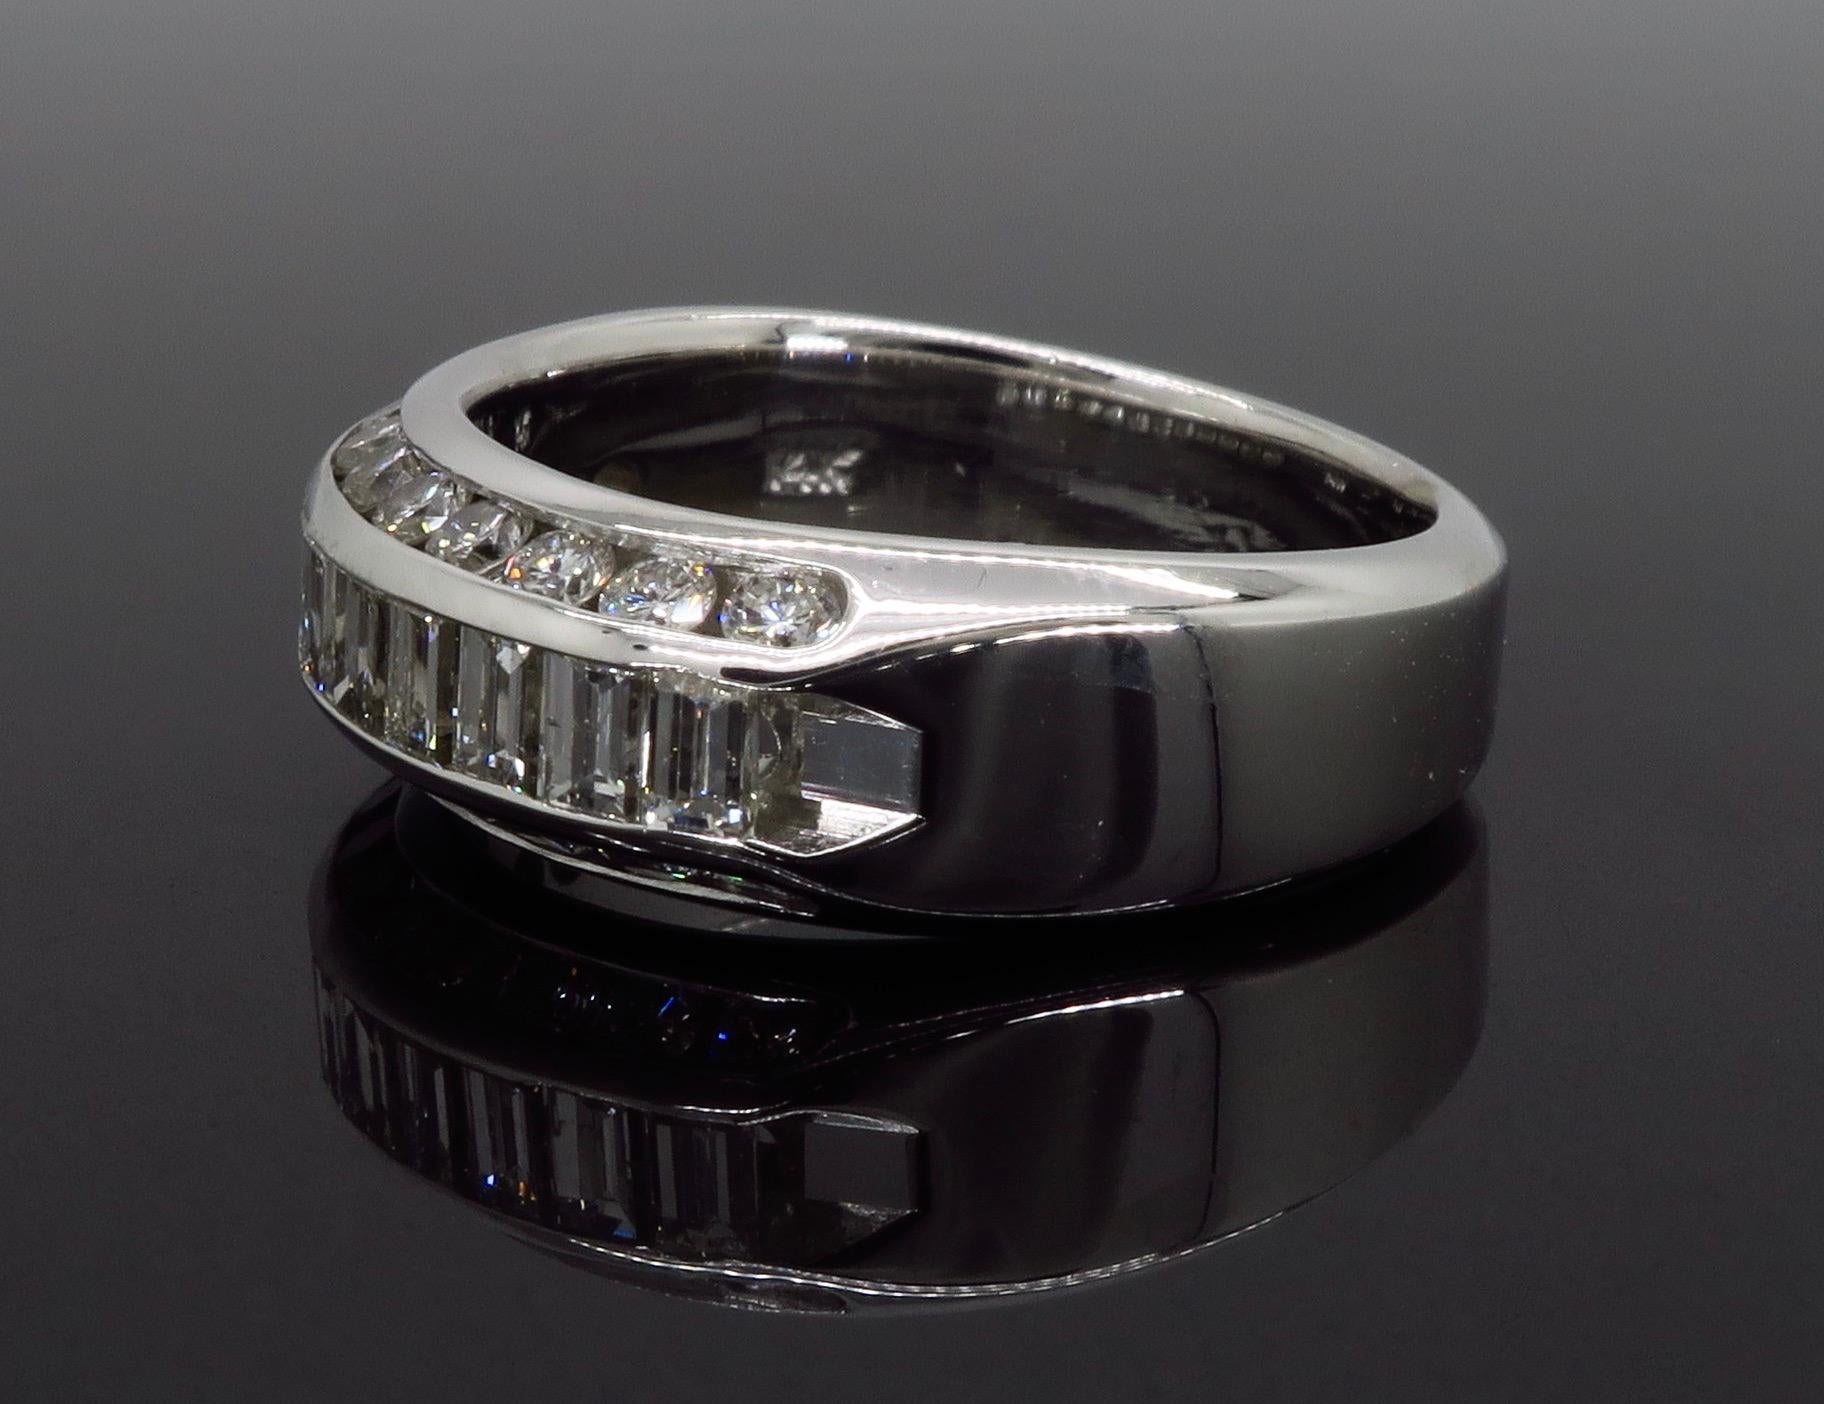 Diamond anniversary band featuring 1.05ctw of Round and Baguette cut diamonds.
Diamond Carat Weight: Approximately 1.05CTW
Diamond Cut: Round & Baguette Cut Diamonds
Color: Average  G-H
Clarity: Average SI2-I1
Metal: 14K White Gold
Marked/Tested: